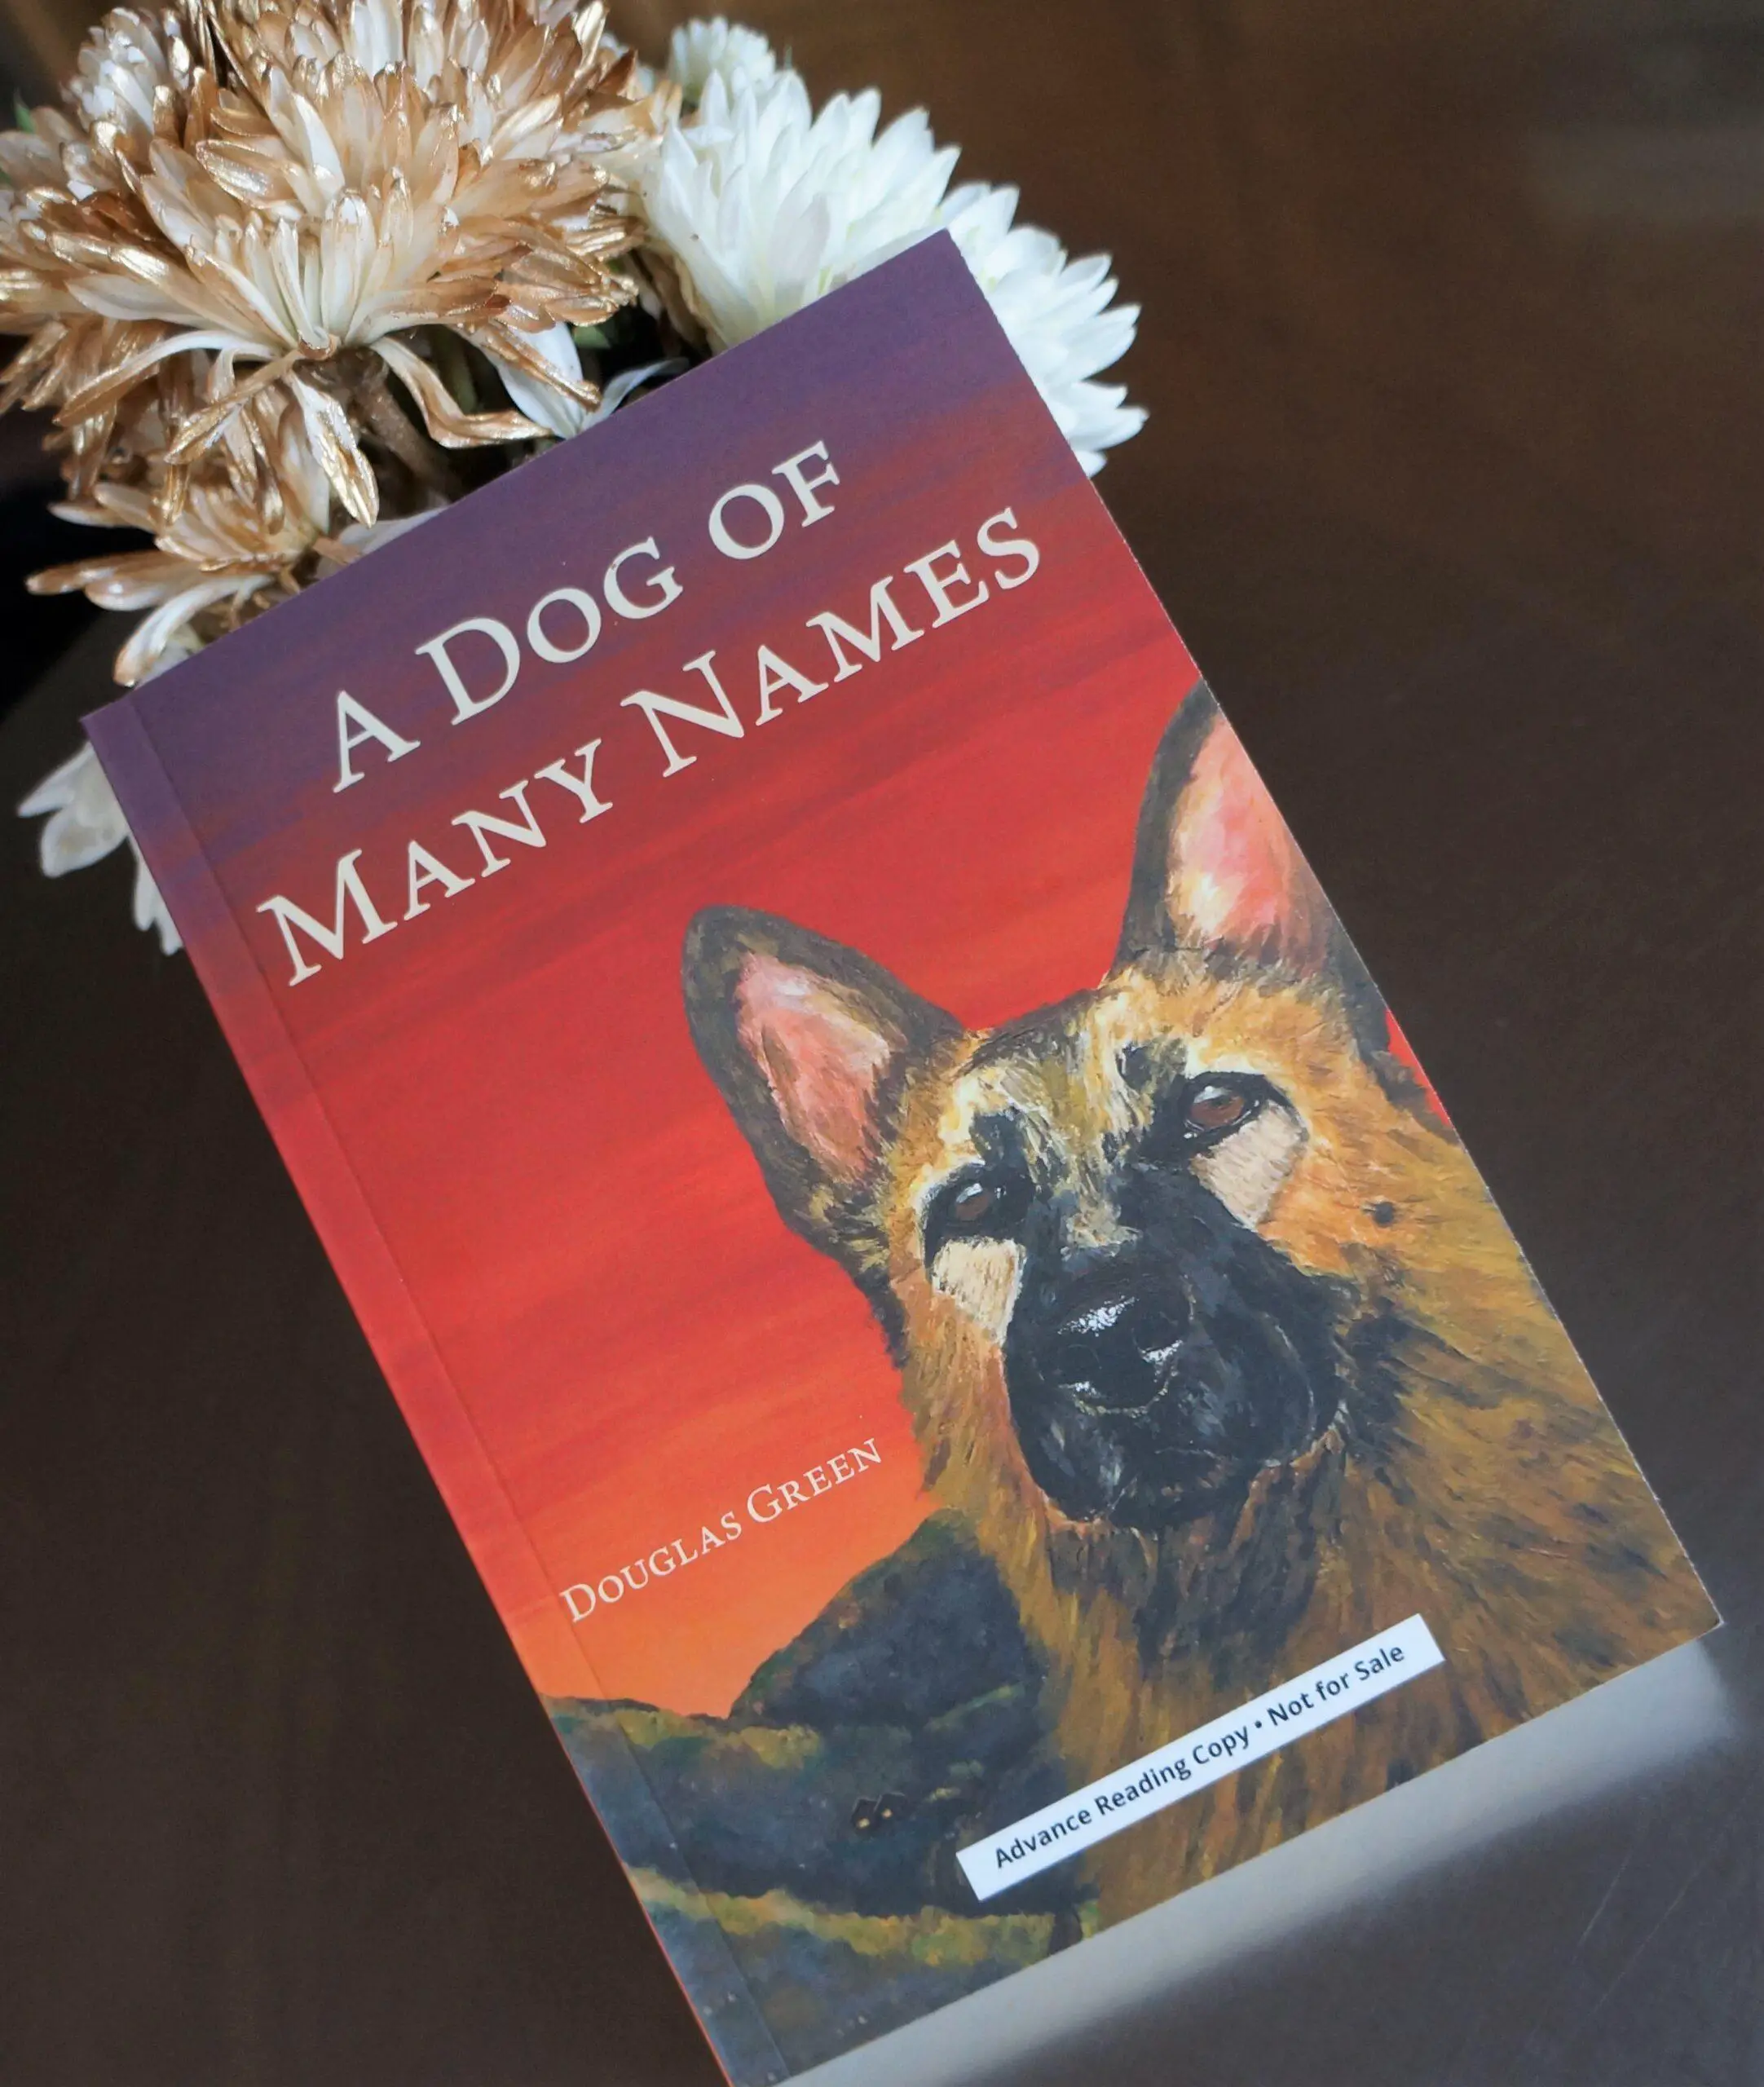 A dog of many names book review - shows book propped up in front of white and metalic sprayed flowers, Book cover is mostly red with a german shepherd like dog in the lower righthand corner and some mountains